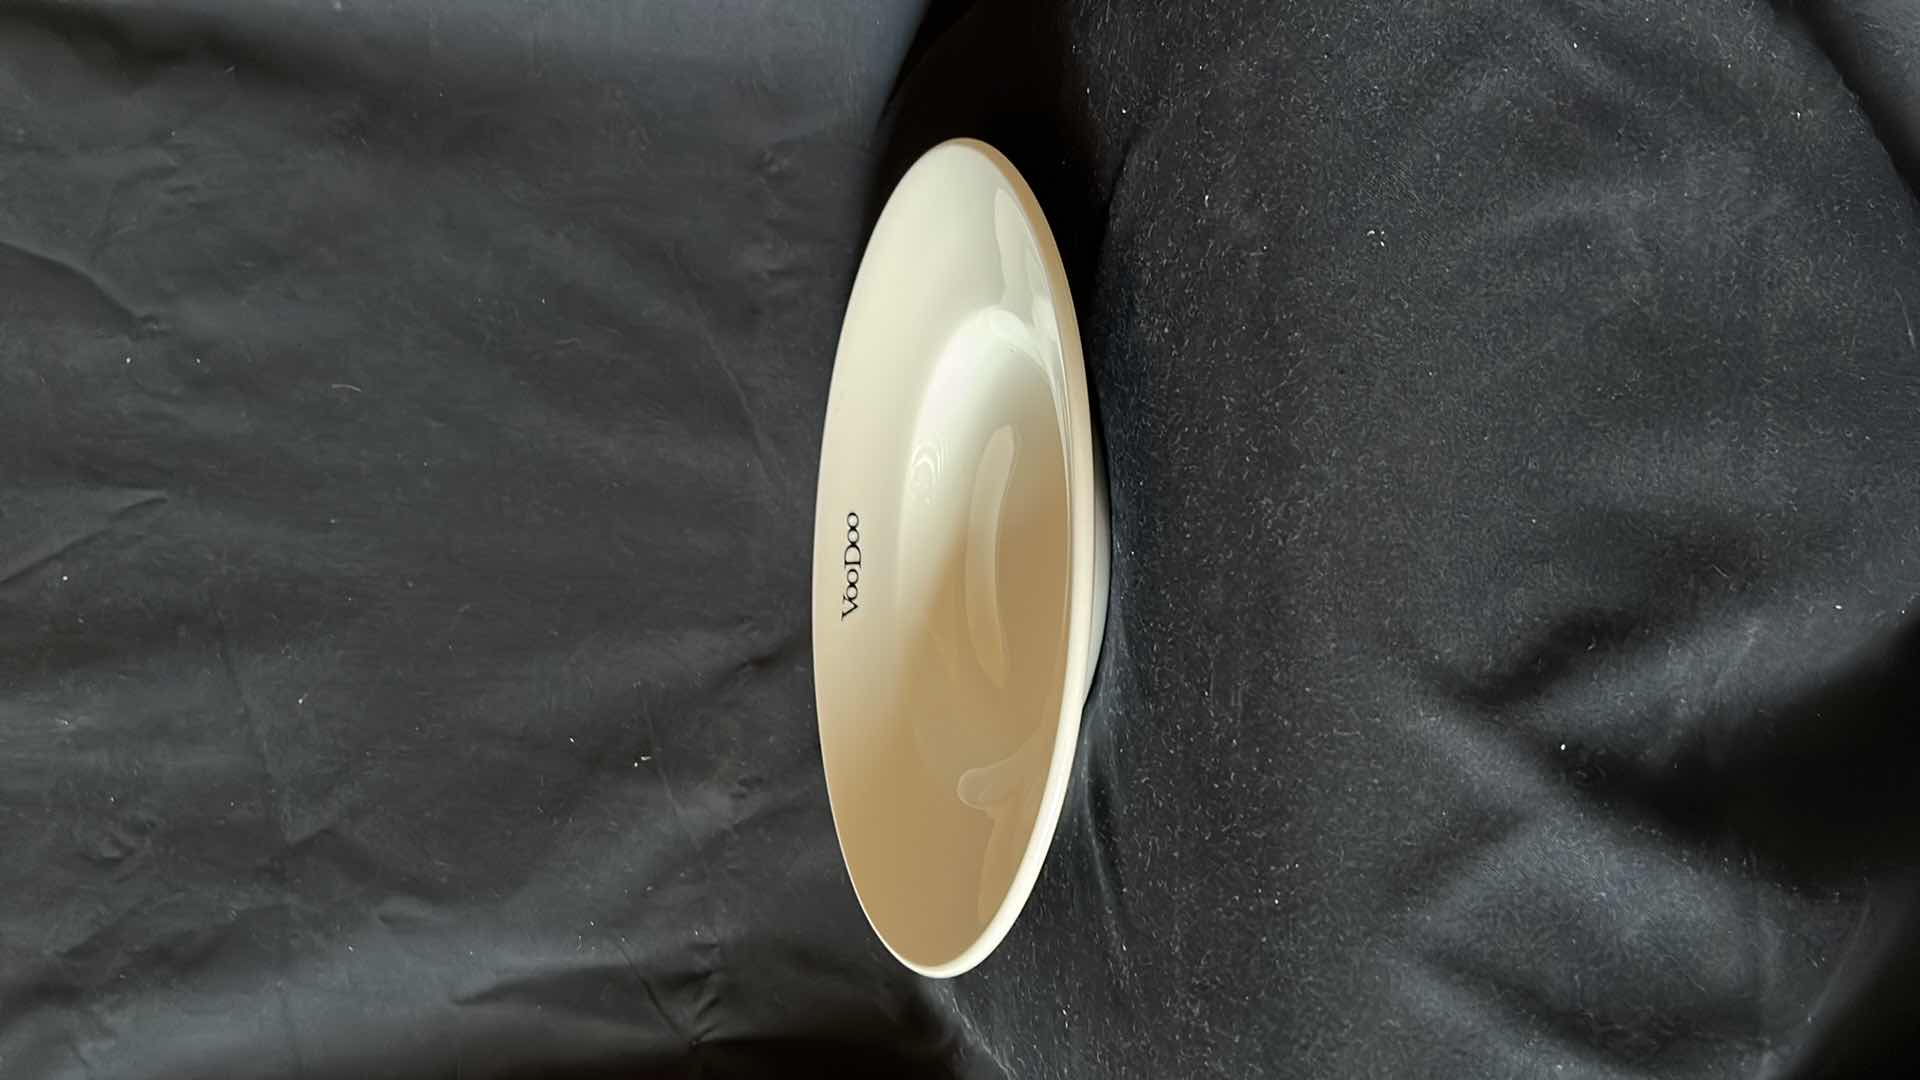 Photo 4 of DUDSON FINEST VOODOO SERVING BOWLS AND SERVING PLATES (SETS OF 4)